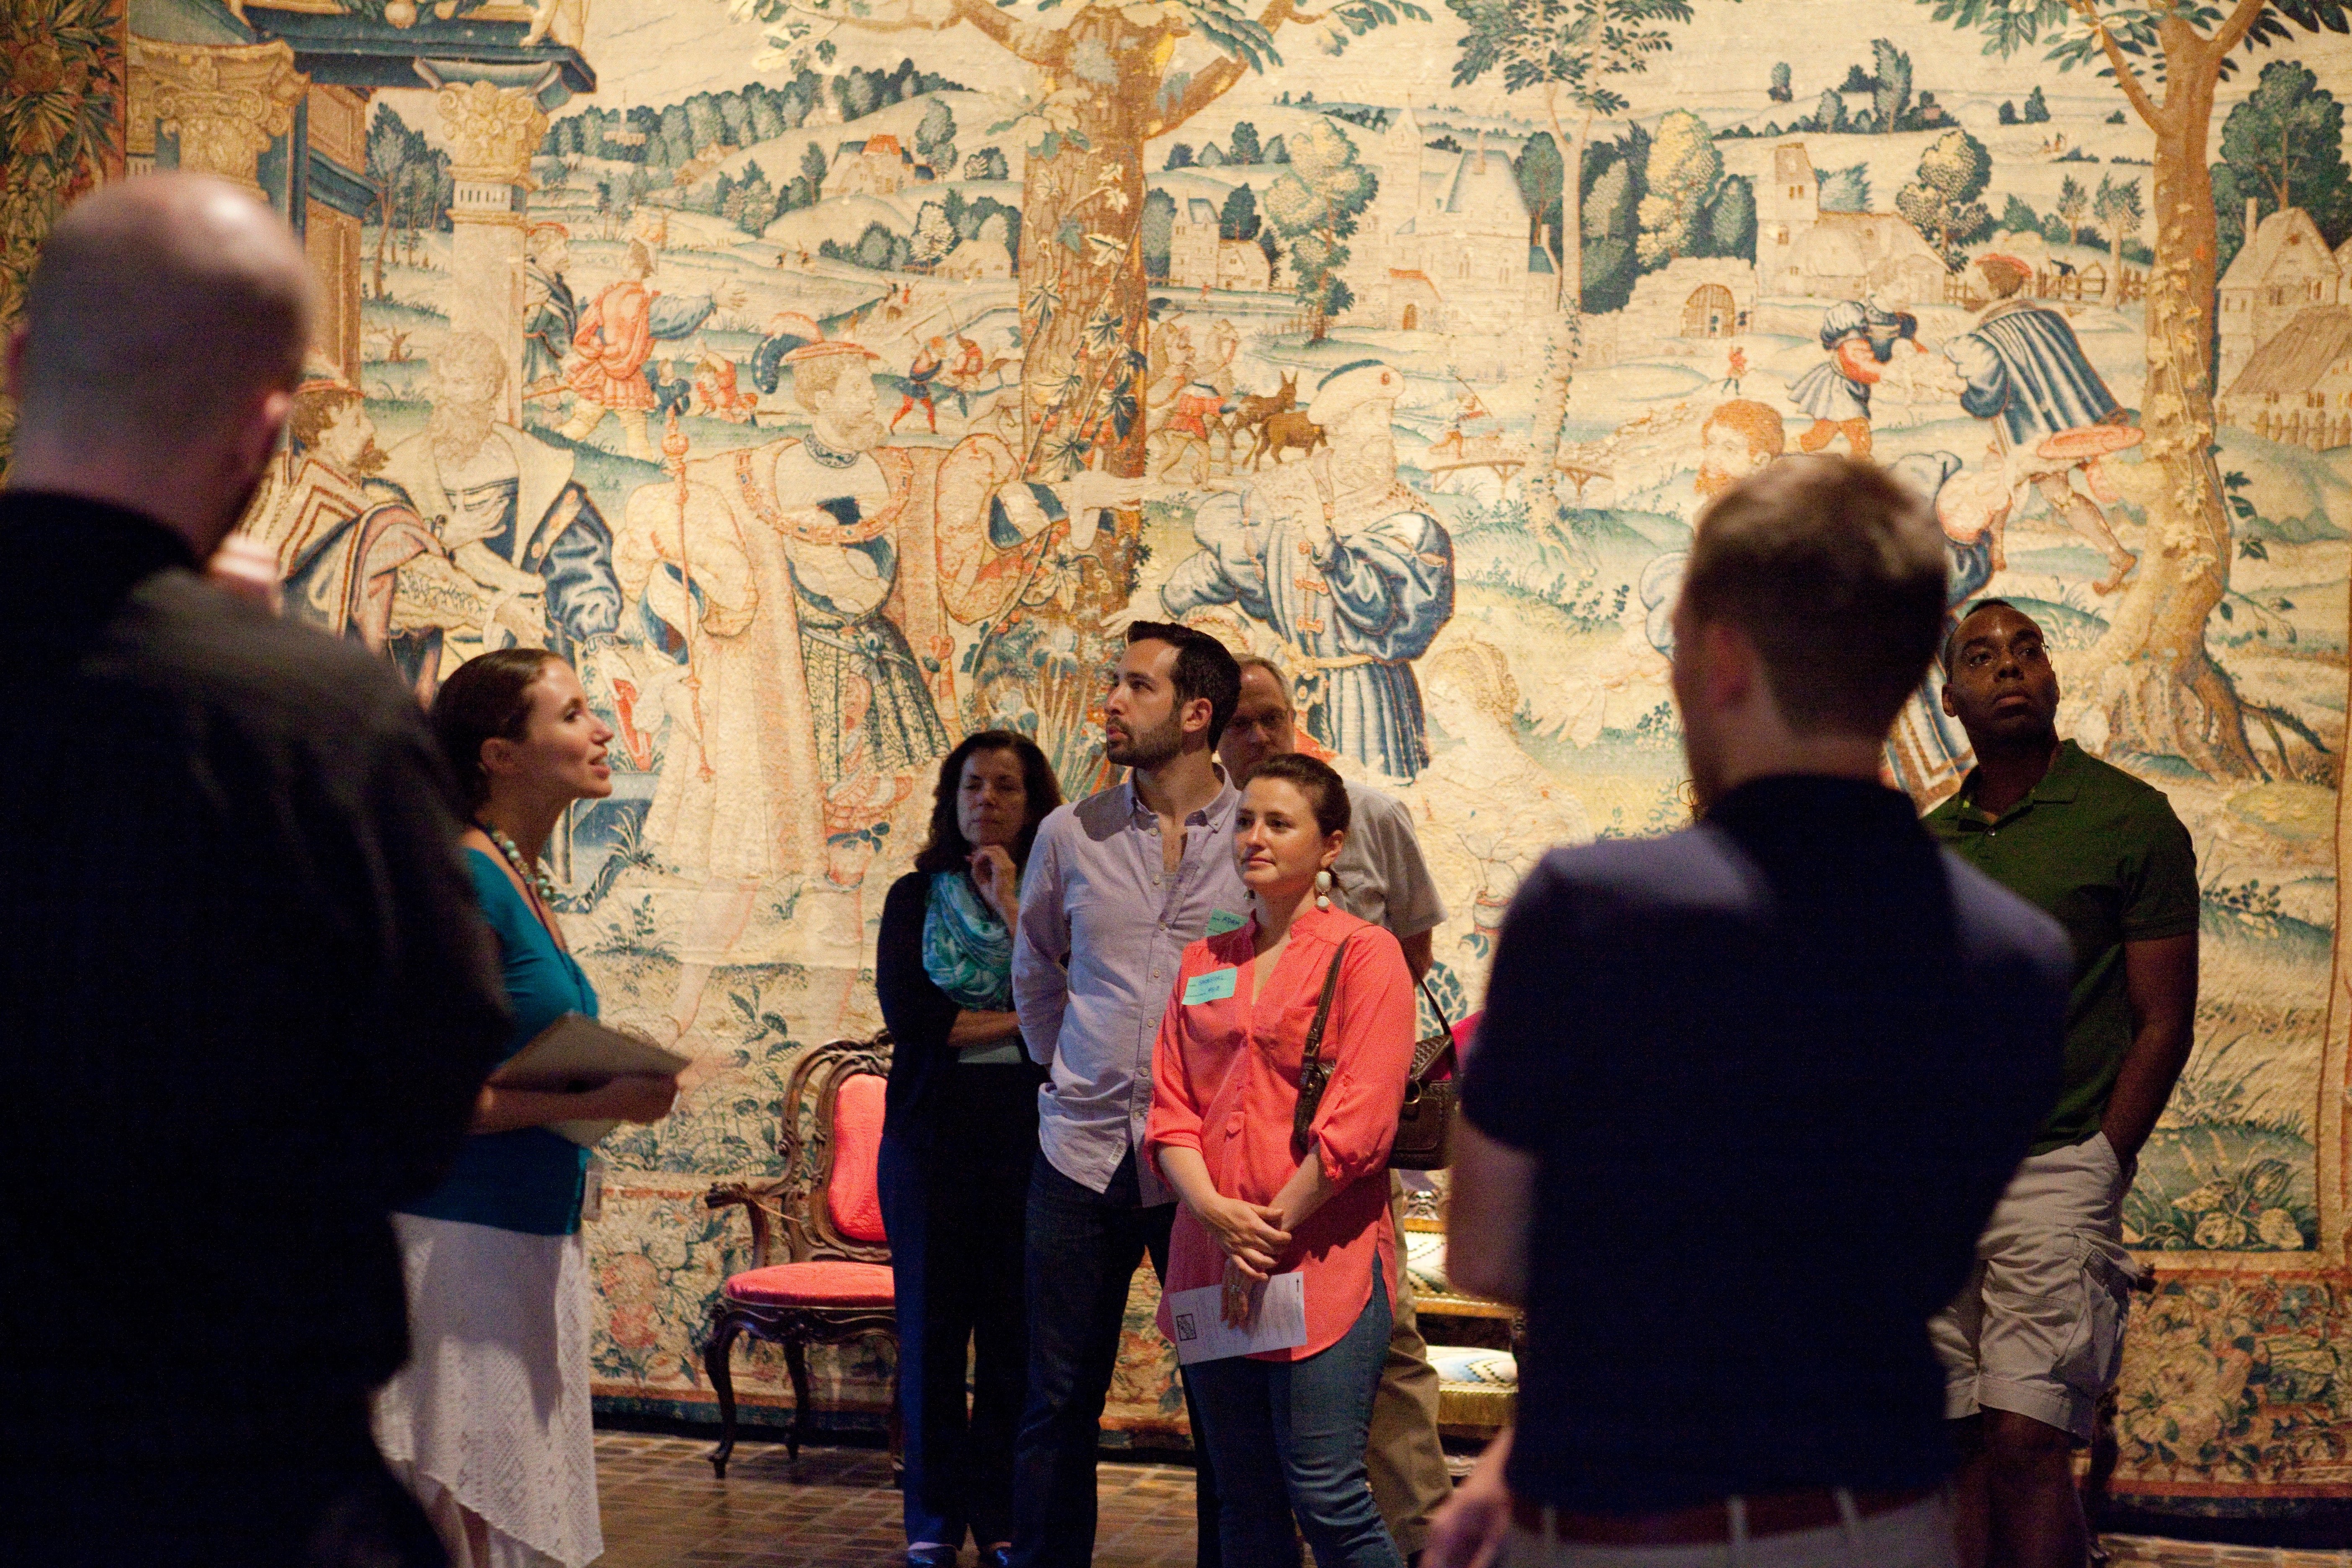 Visitors at a museum listen to the guide.